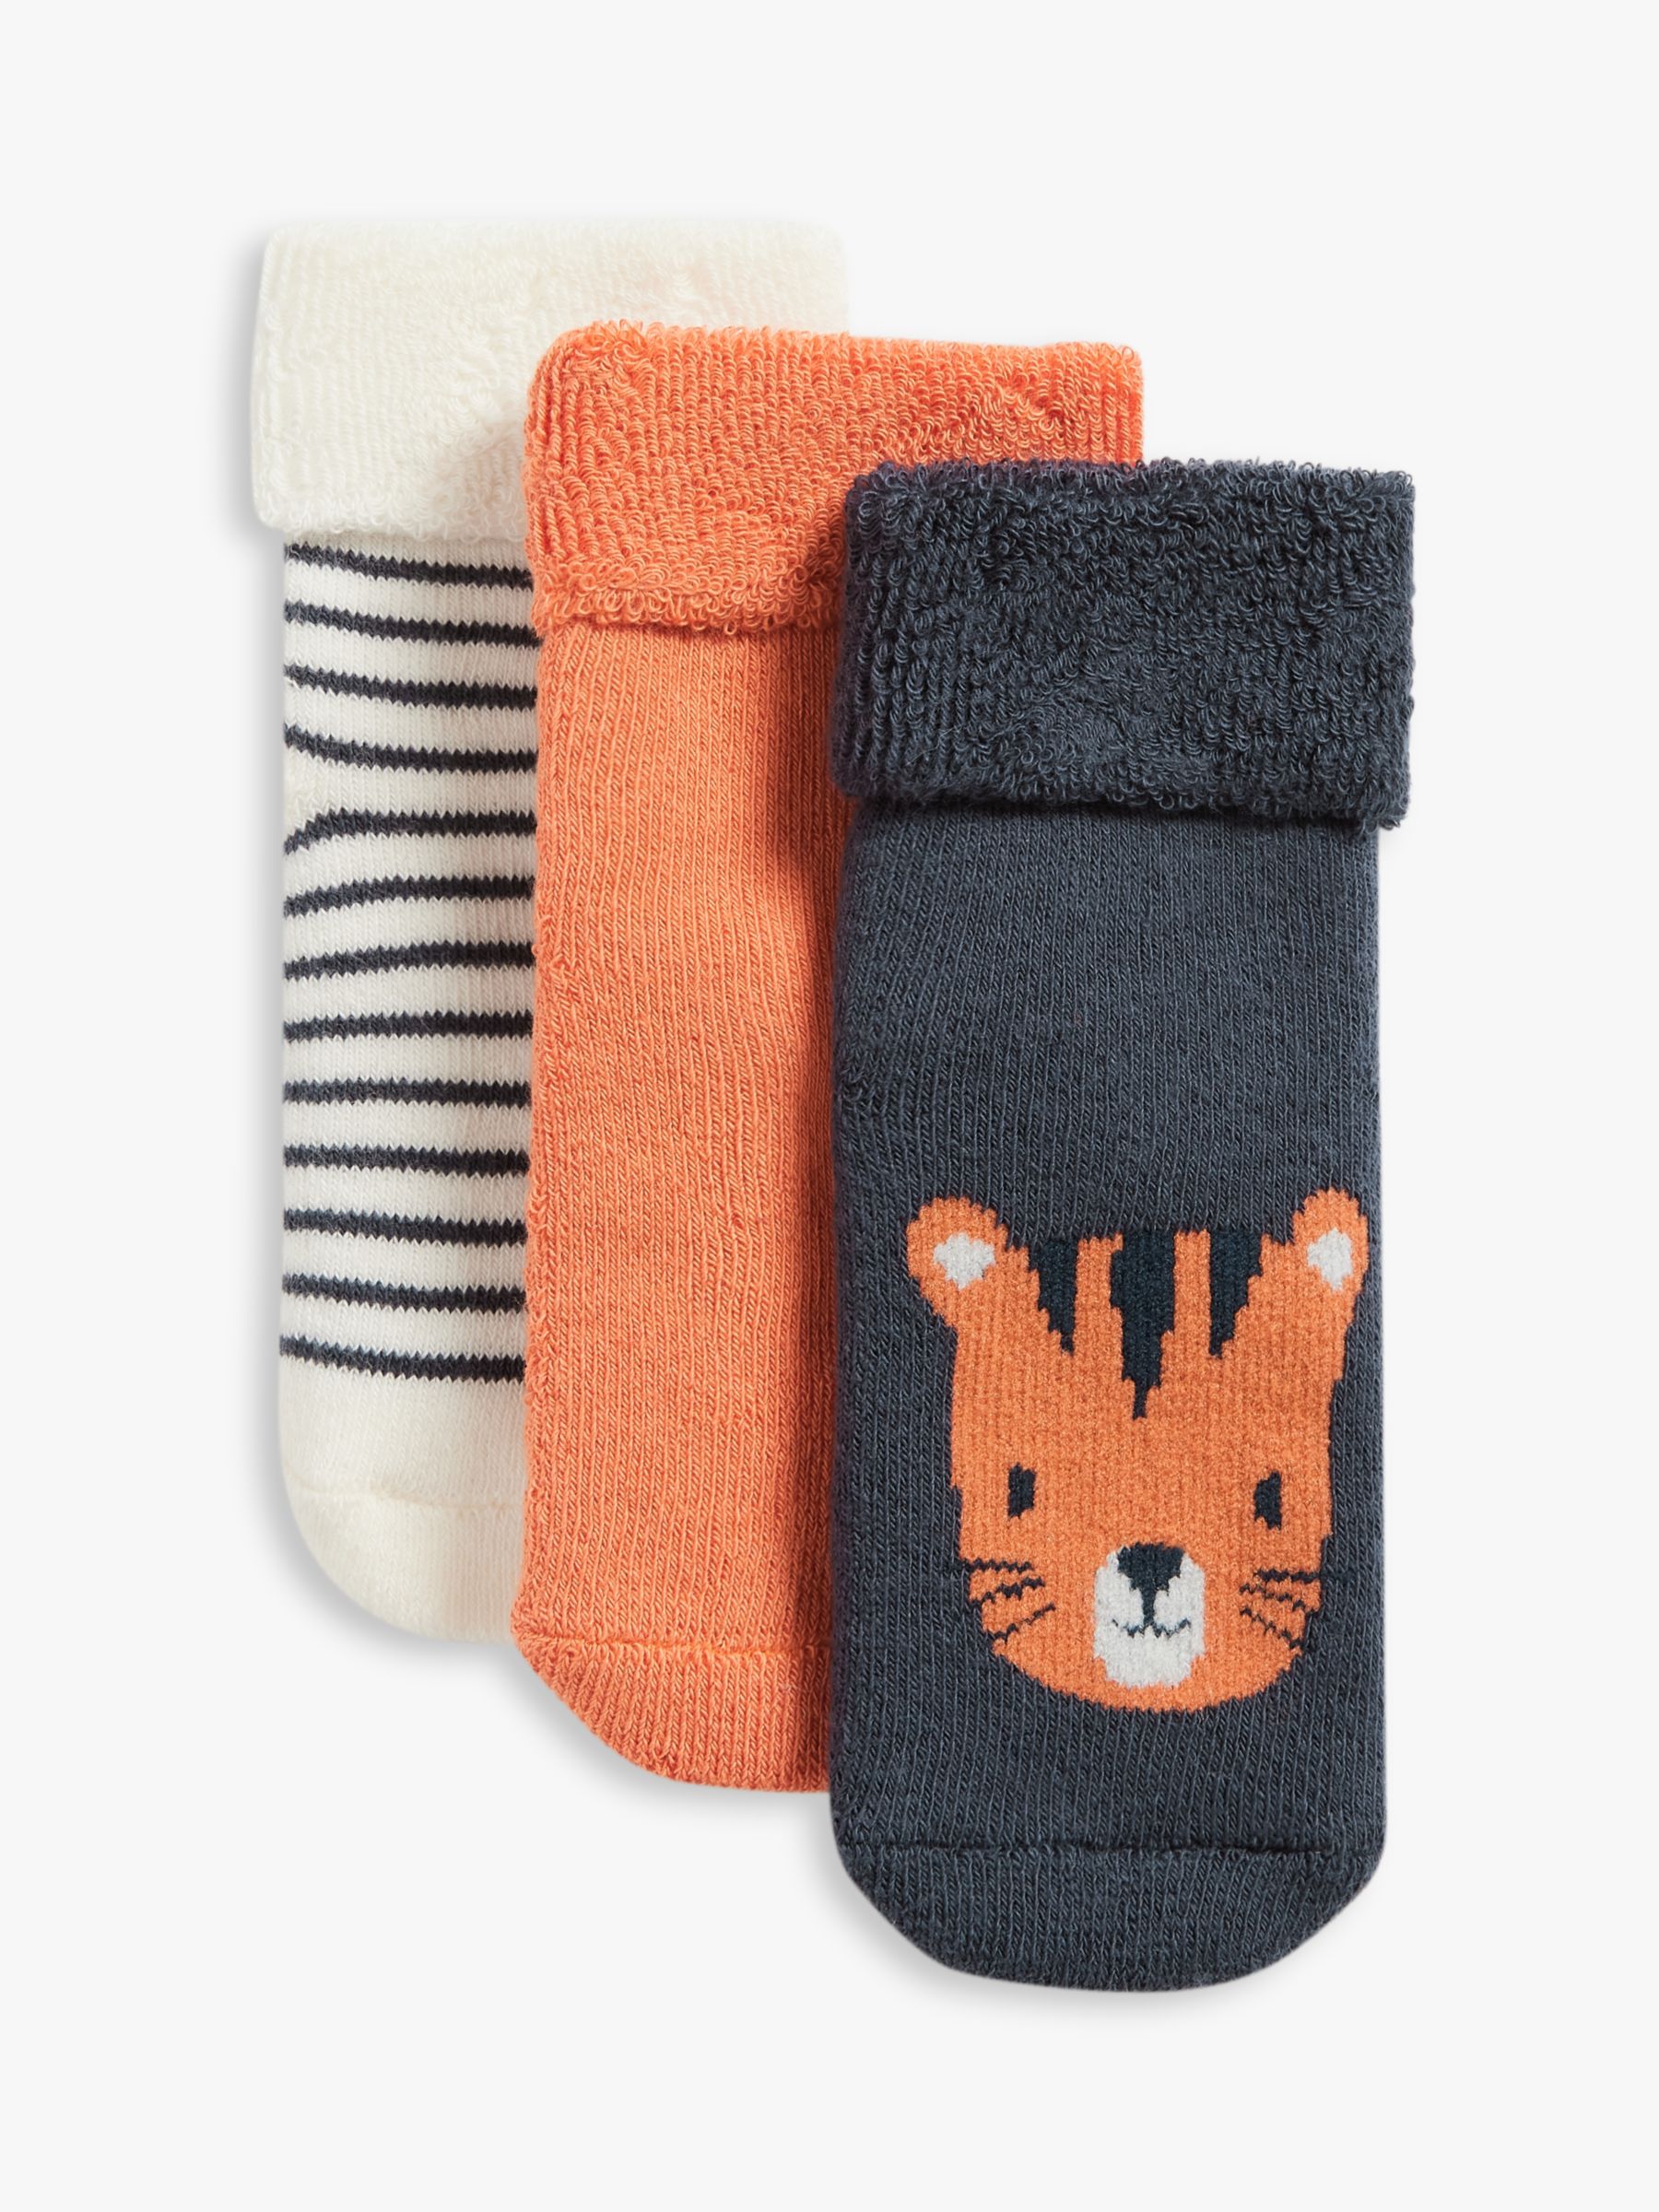 Best slipper socks for toddlers that are warm, comfortable and easy to walk  in